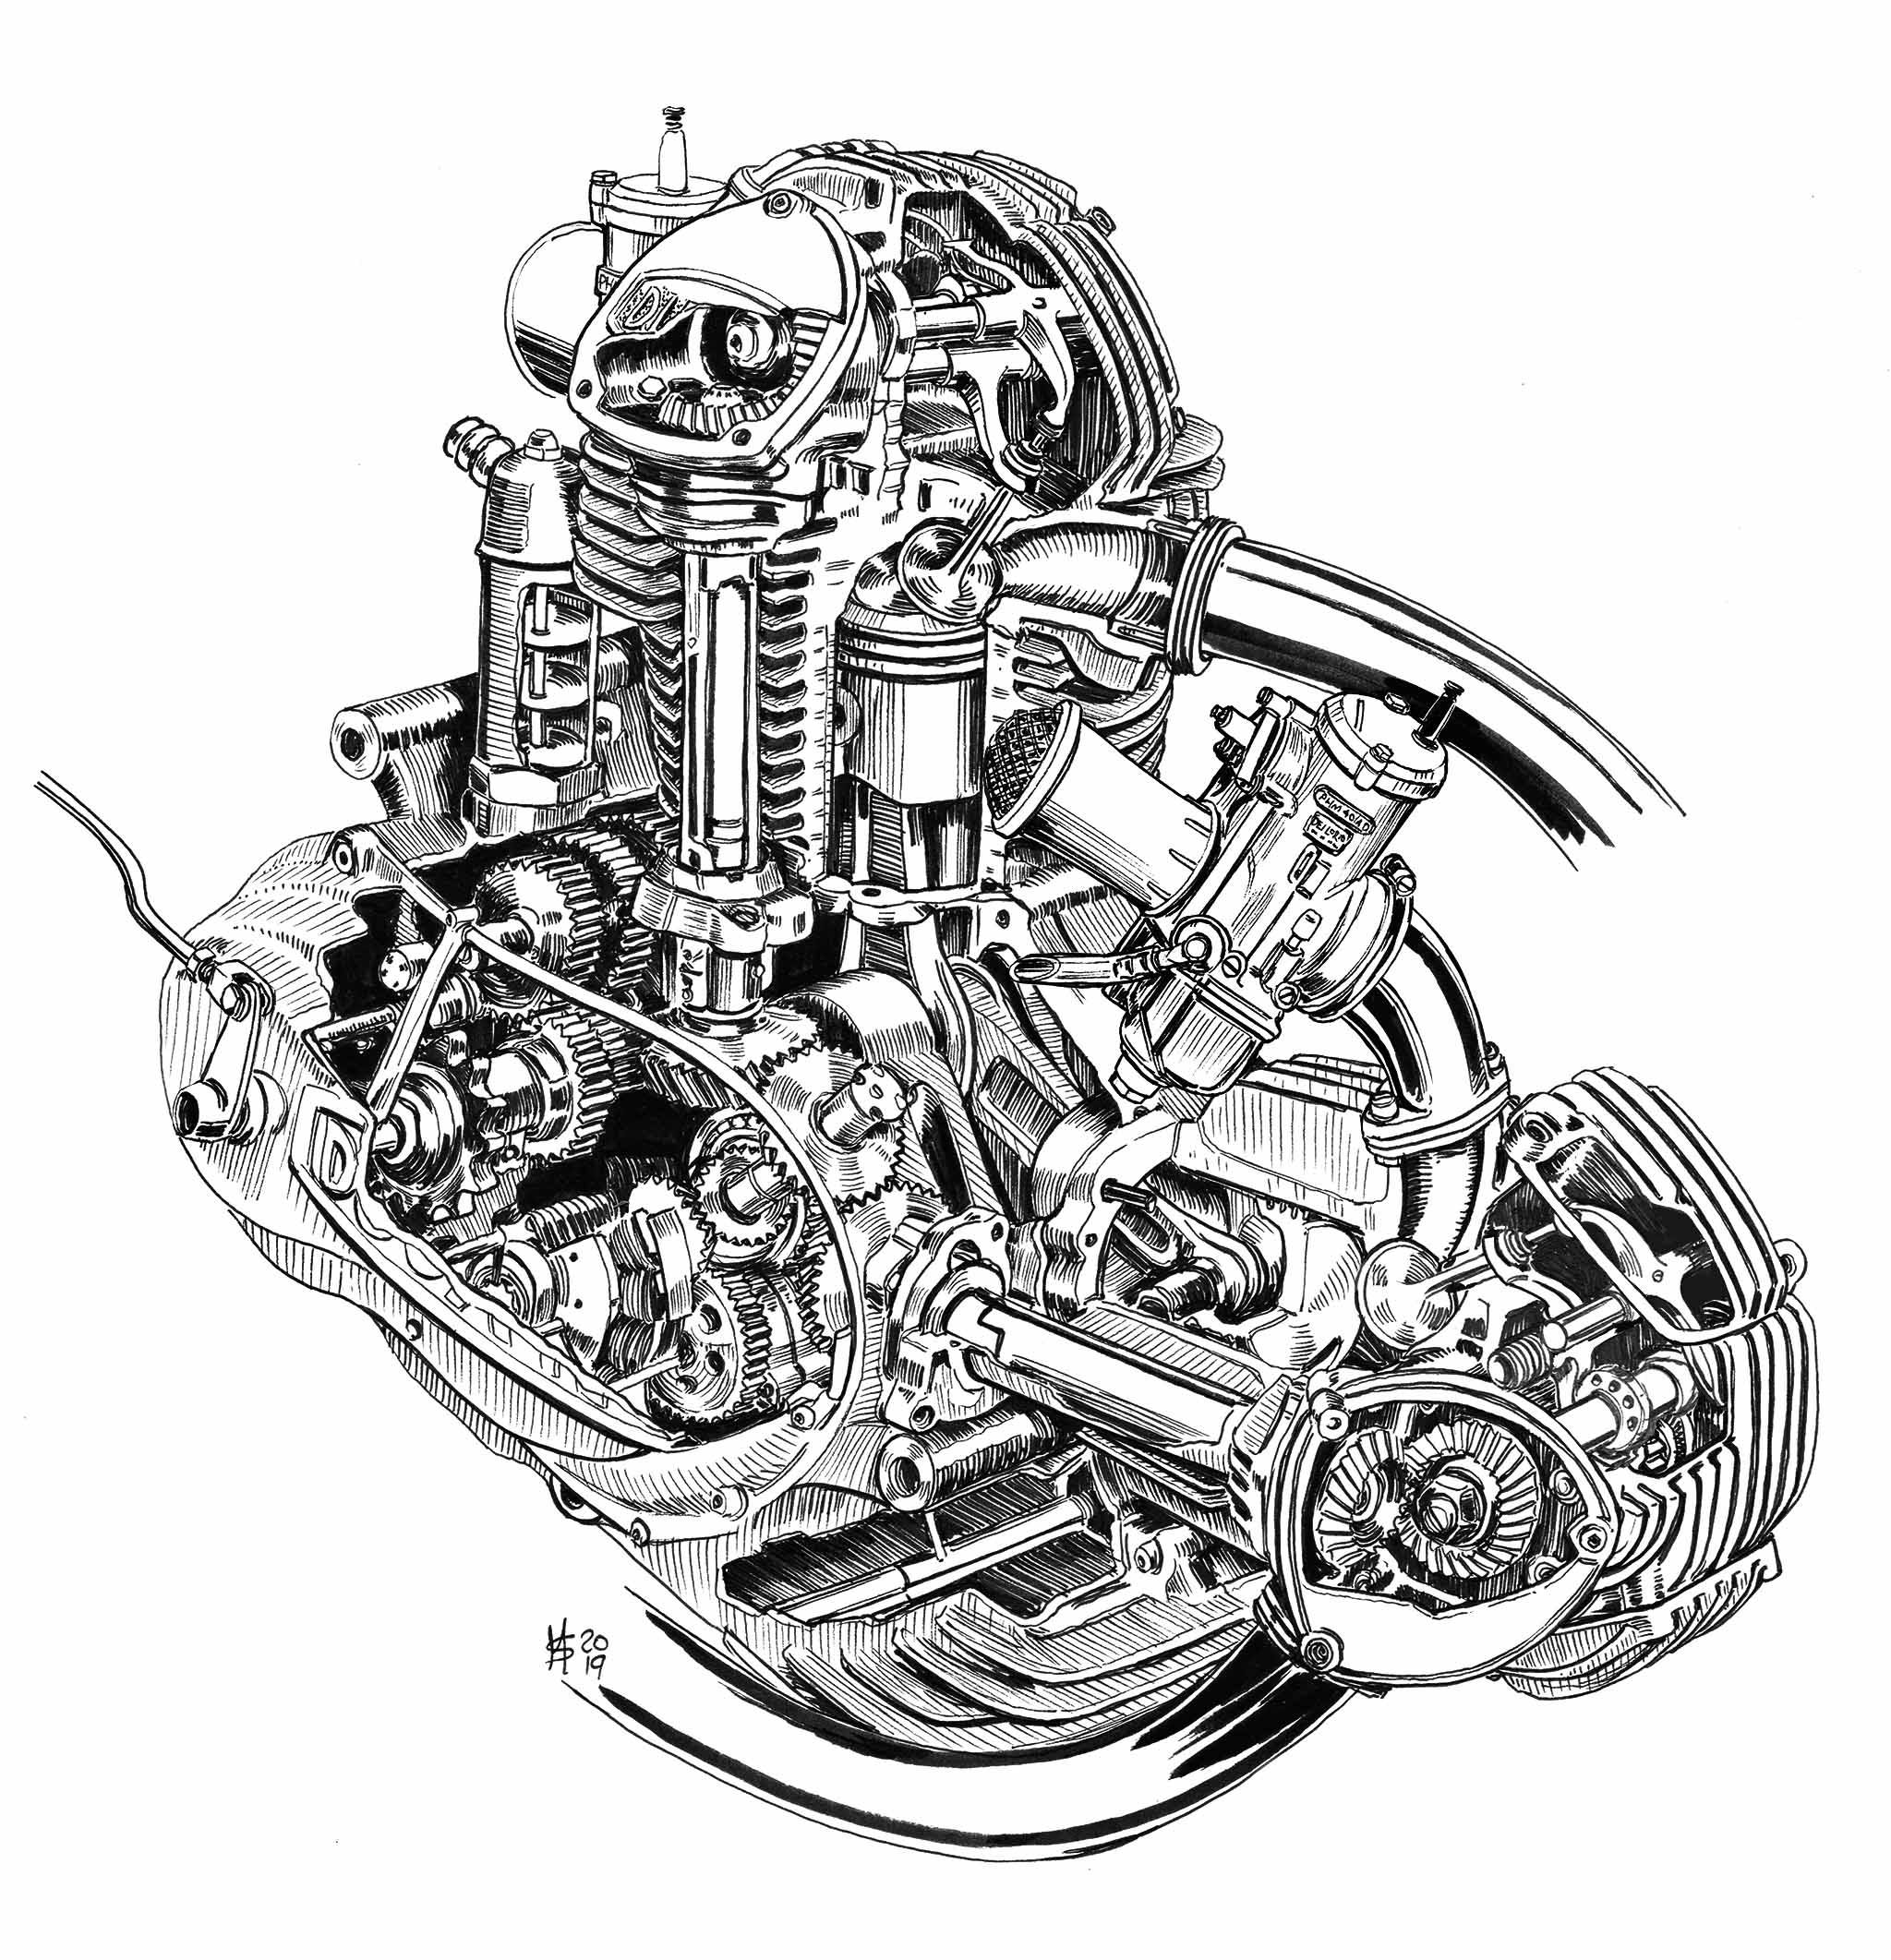 Stock Stories 750SS Engine